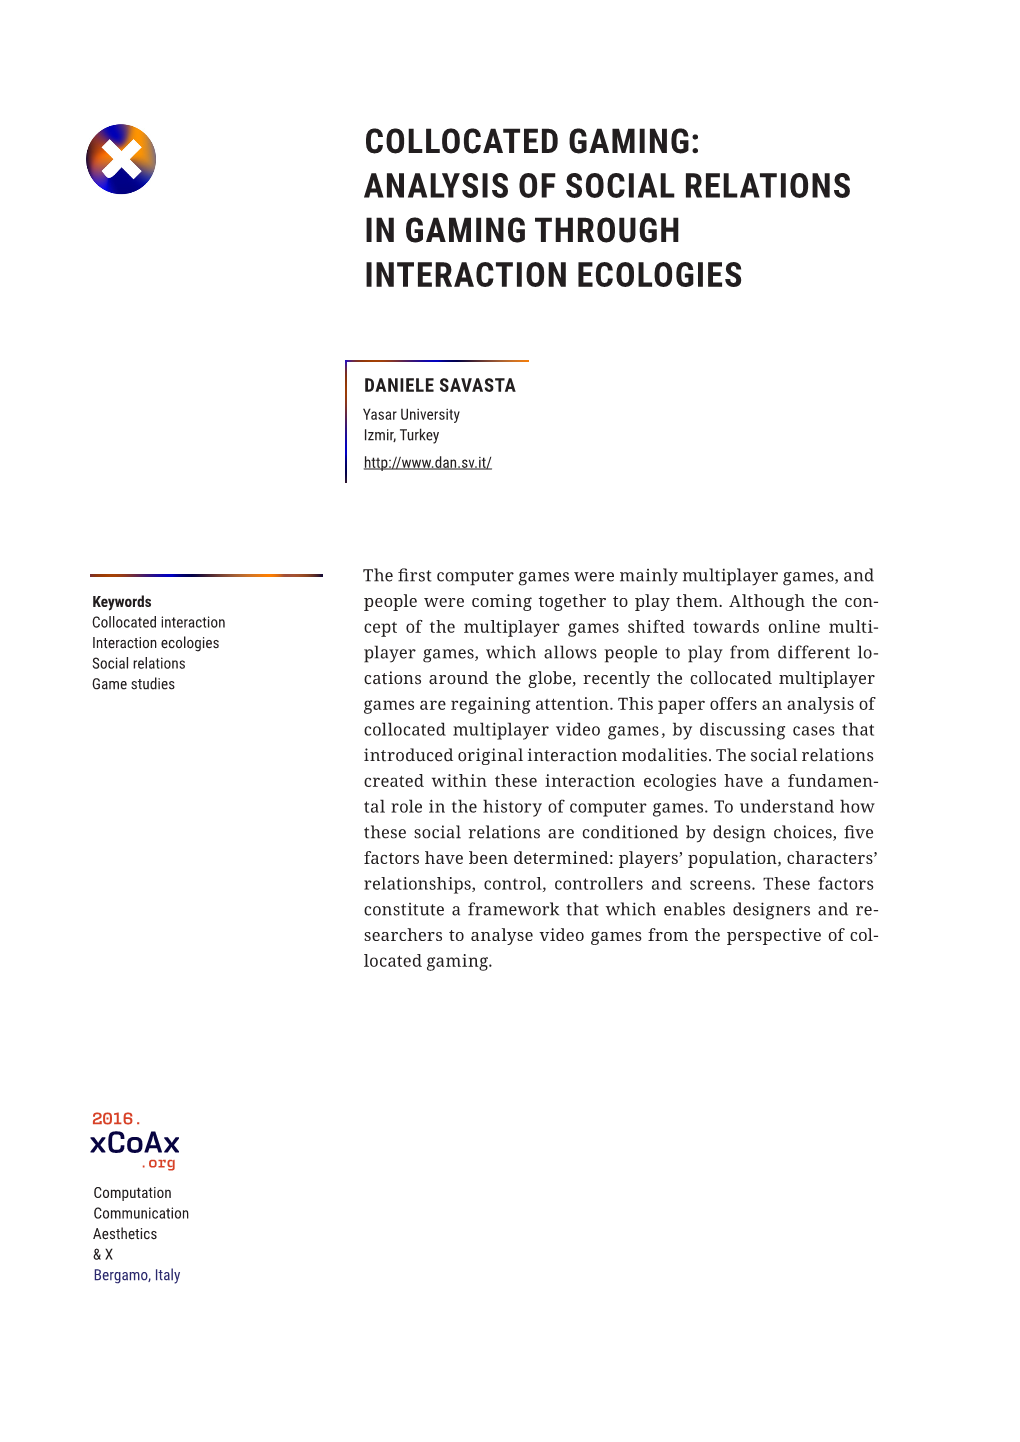 Collocated Gaming: Analysis of Social Relations in Gaming Through Interaction Ecologies